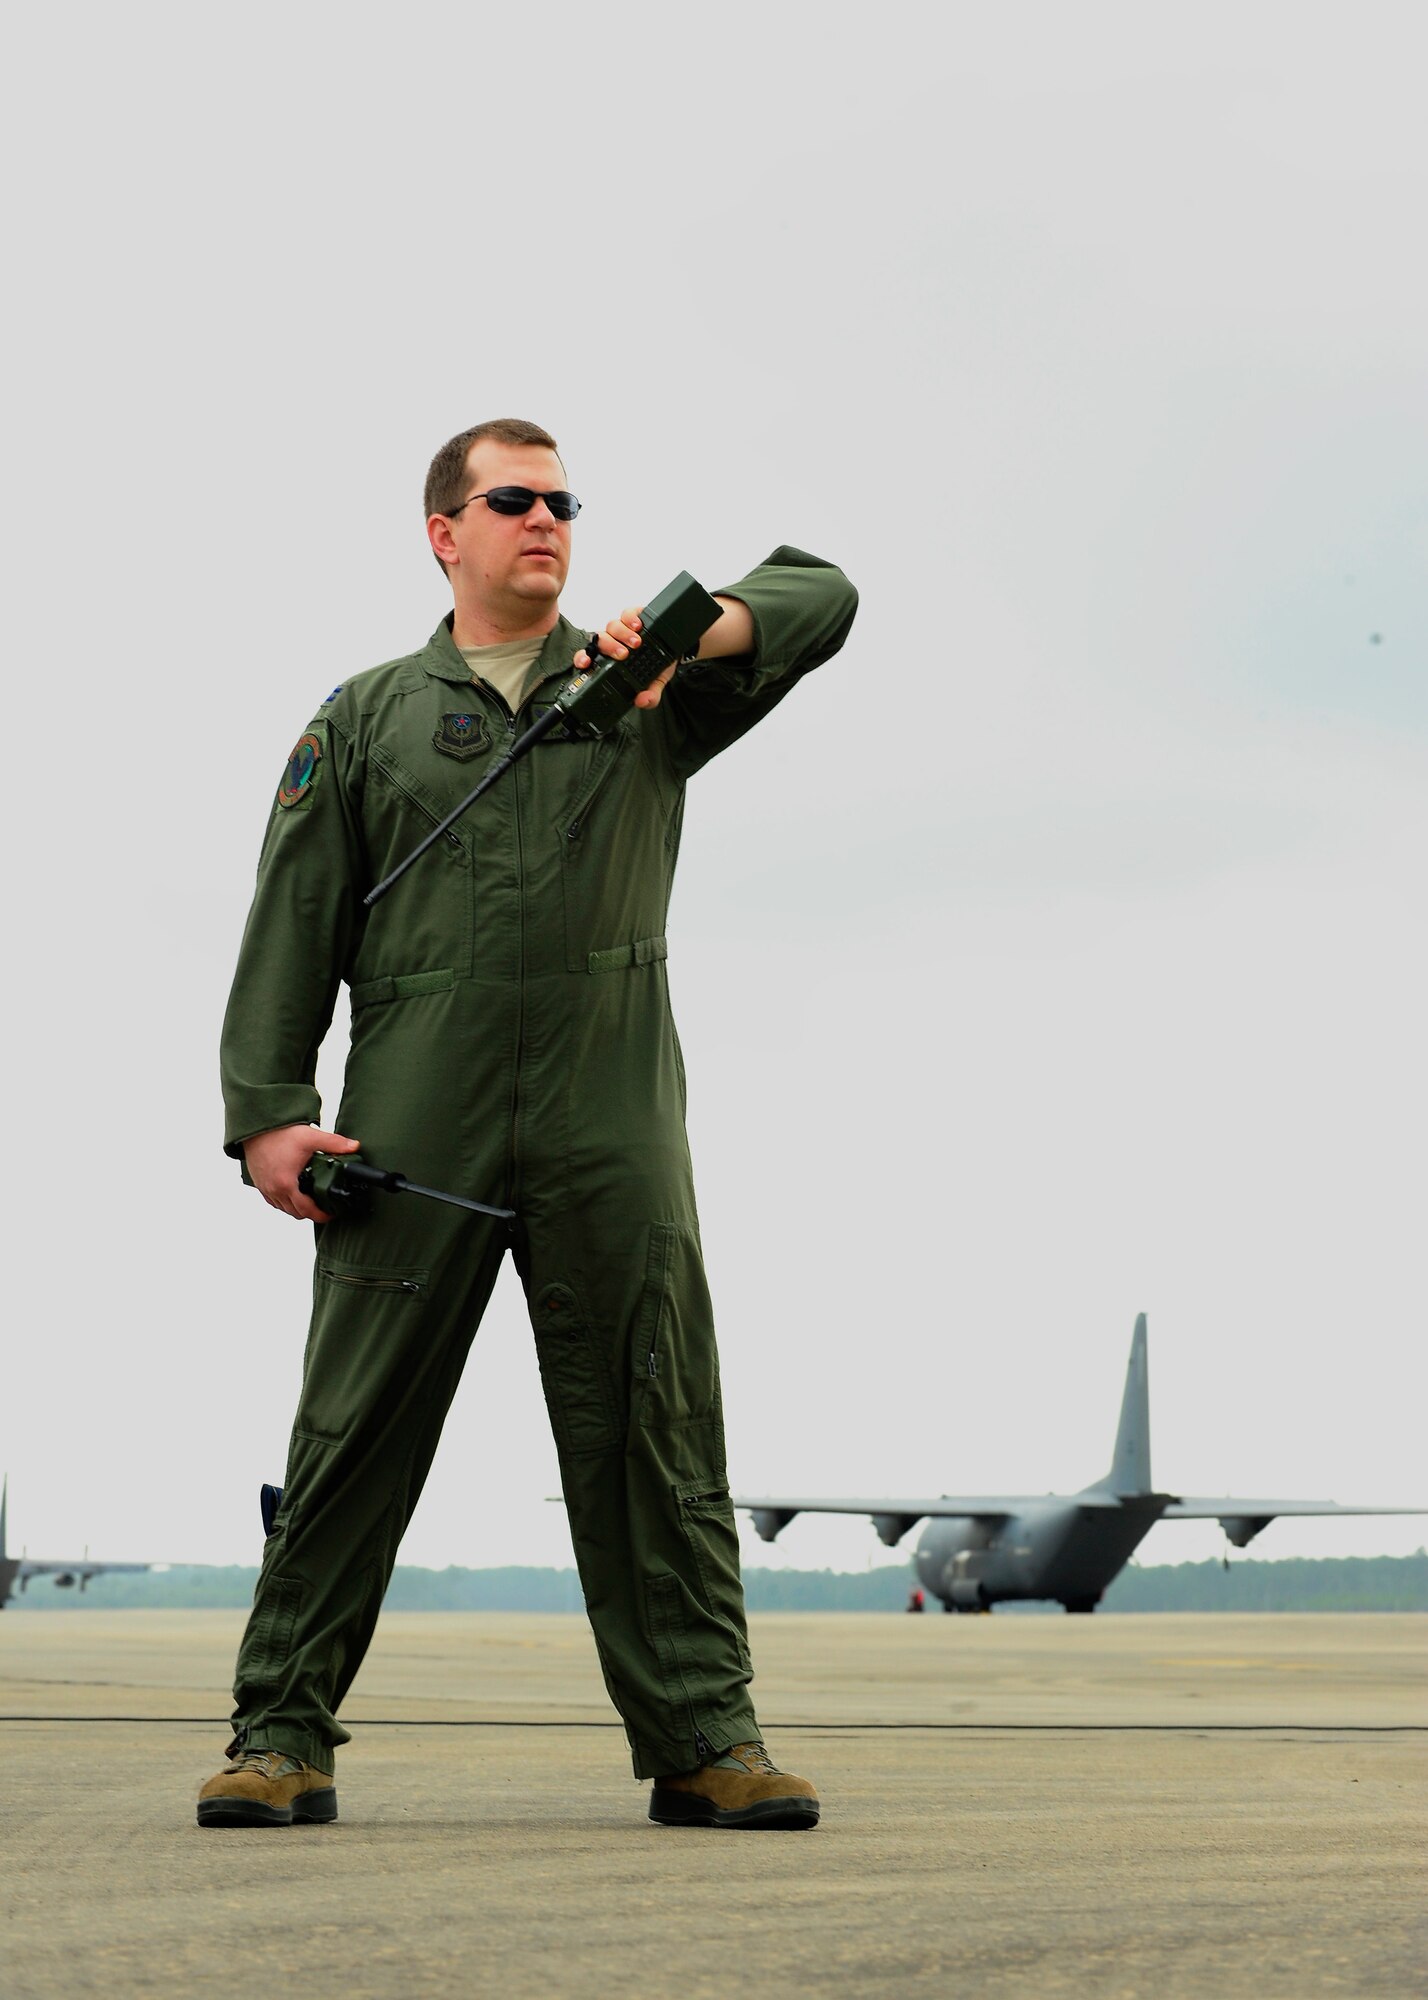 Capt. Tim Nettles, 1st Special Operations Group Detachment 1 pilot, listens to instructions from the MC-130P Combat Shadow aircraft during a heritage flight at Hurlburt Field Fla., May 15, 2015. Aircrafts 66-0217 and 69-5819 are the last two MC-130P Combat Shadow aircraft in the Air Force to be retired. On June 1, 217 and 819 will take their last flight to the boneyard at Davis-Monthan Air Force Base, Arizona. (U.S. Air Force photo/Airman 1st Class Andrea Posey)